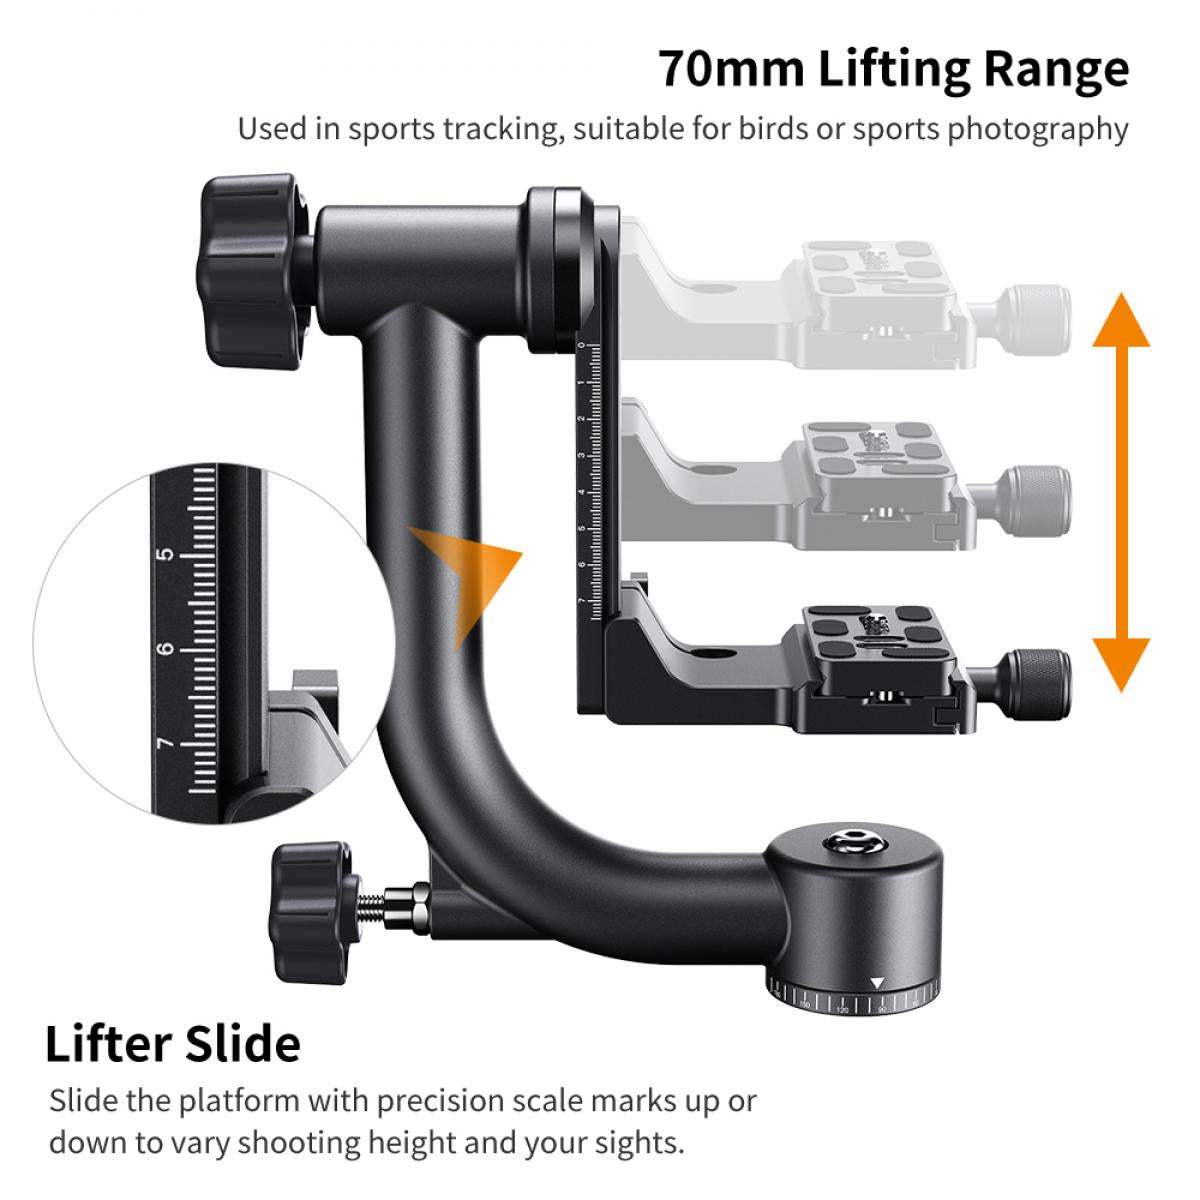 K&F Concept Heavy Duty Aluminum Gimbal Tripod Head with 20kg Load Capacity, 360 Rotation, 1/4" Quick Release Plate for Photography Filming Equipment